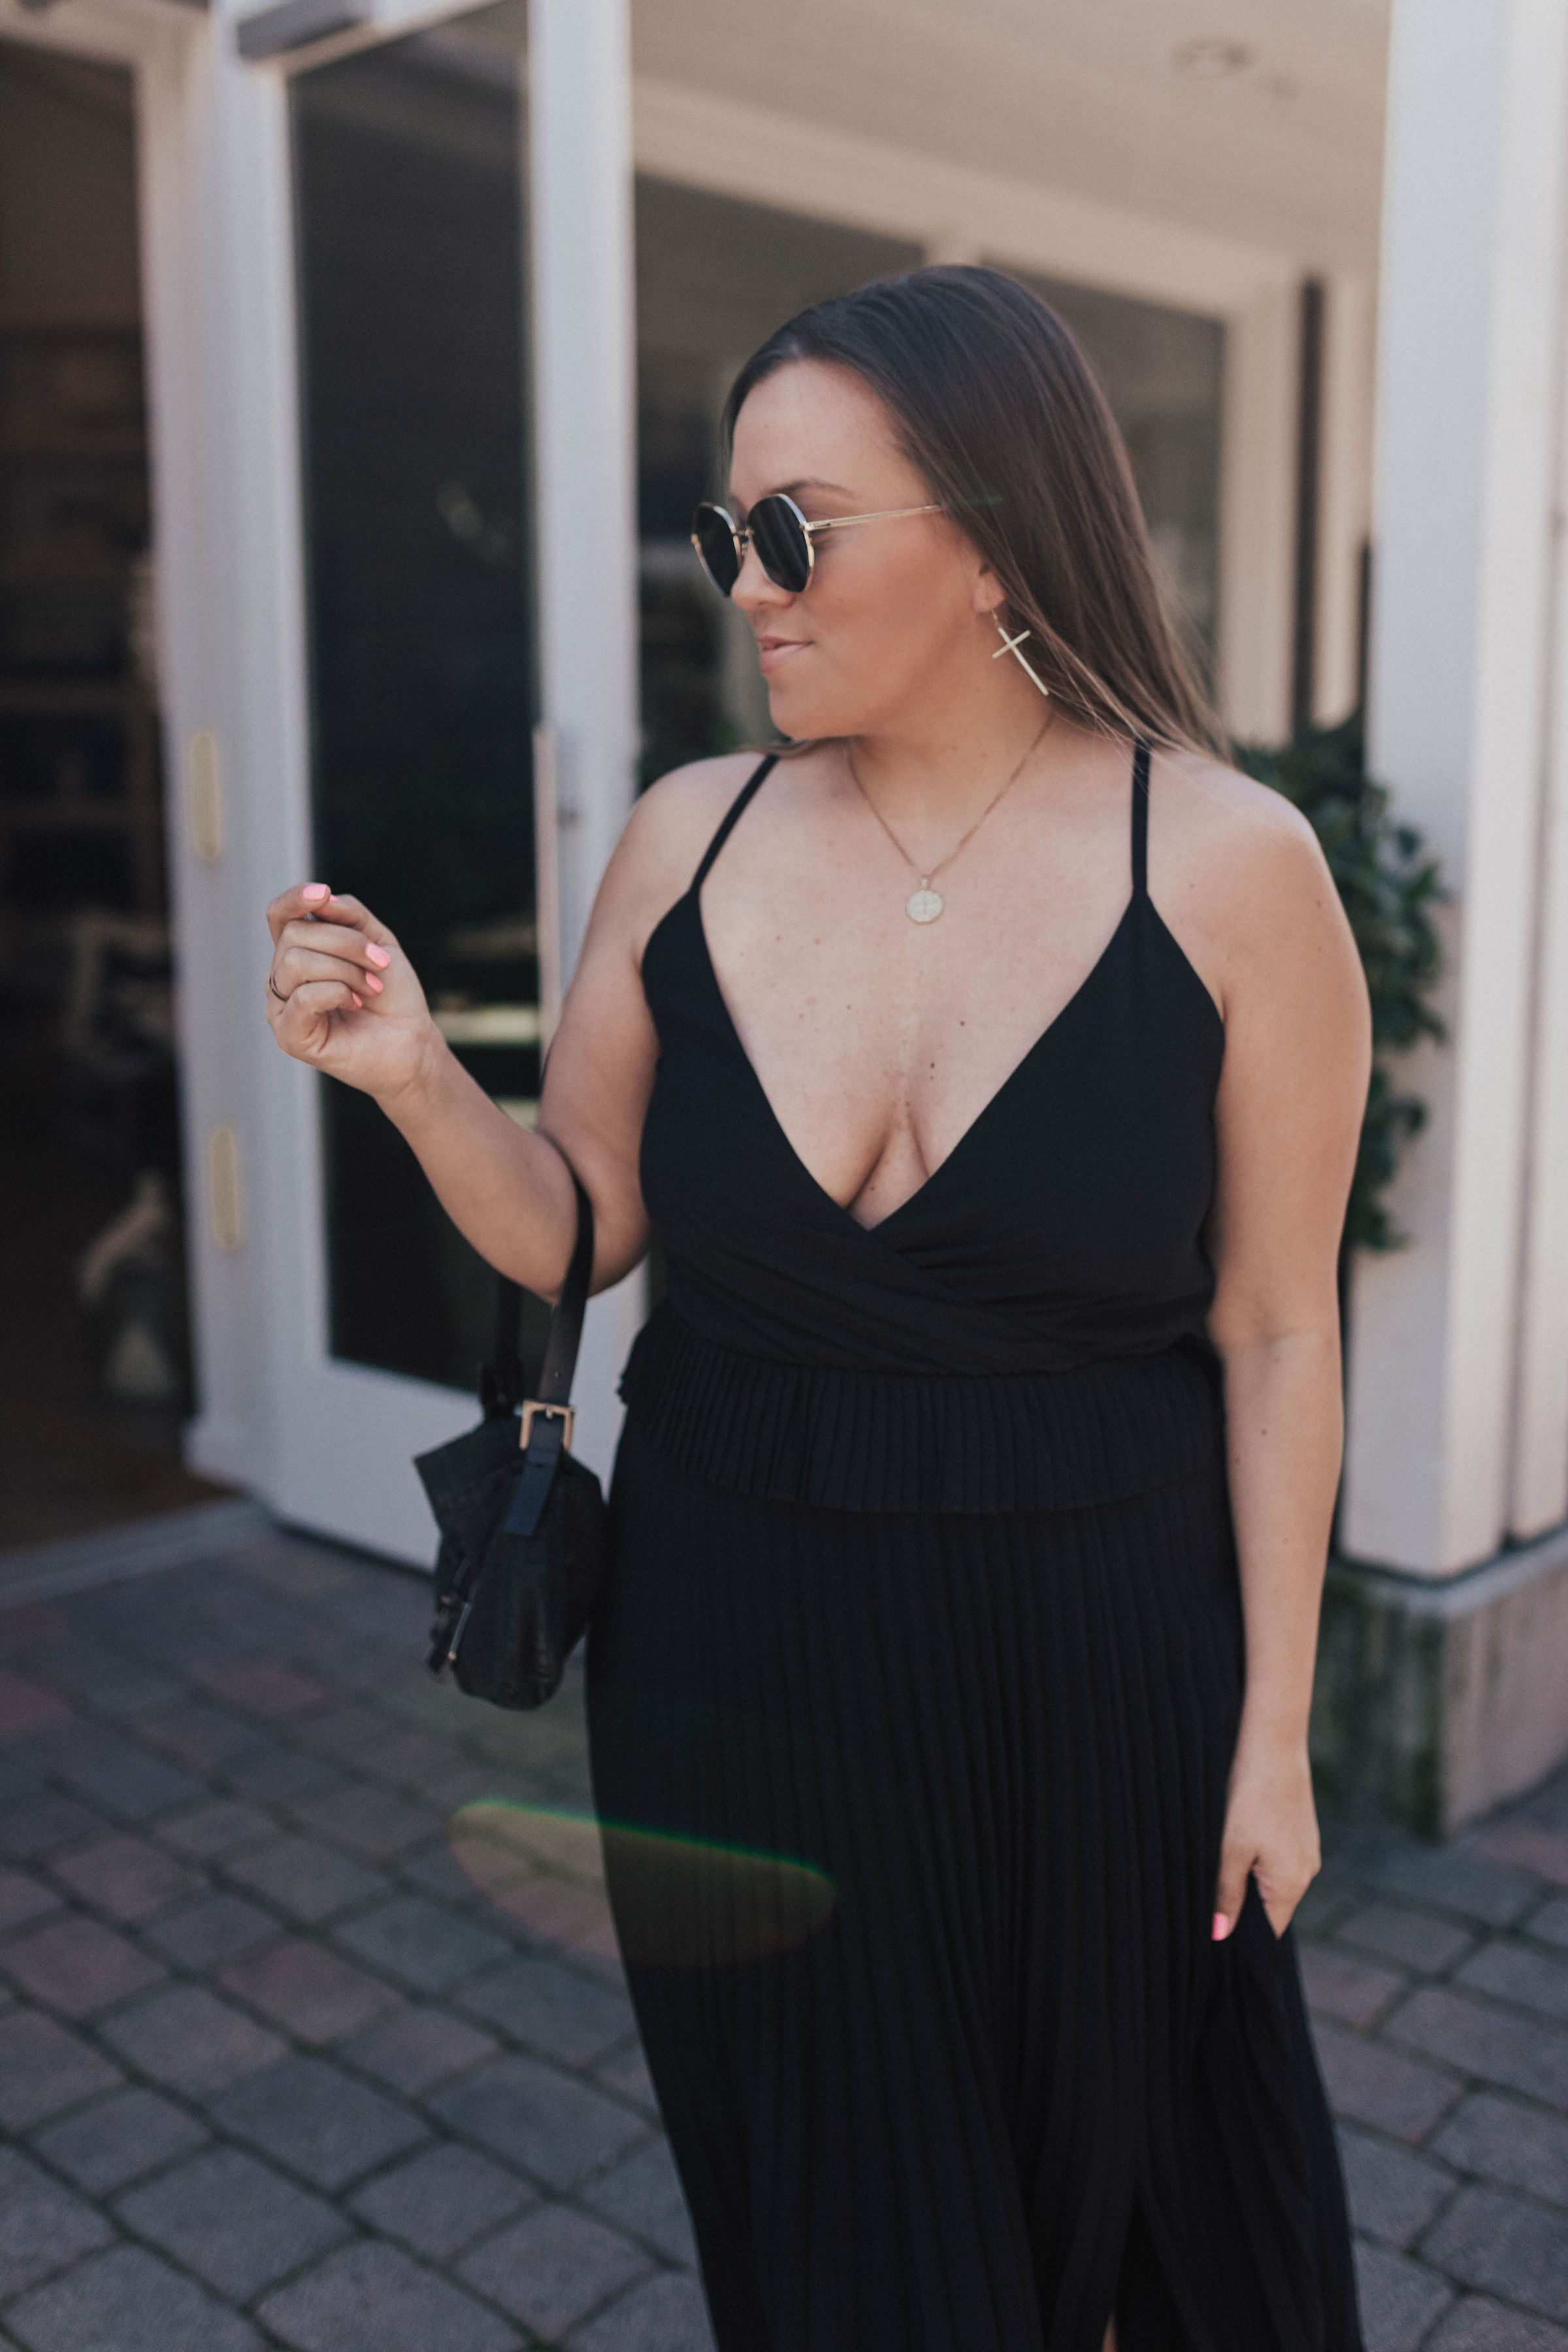 San Francisco blogger, Ashley Zeal, from Two Peas in a Prada shares her Amazon Favorites March. Featuring her favorite straws, makeup sponges and more!